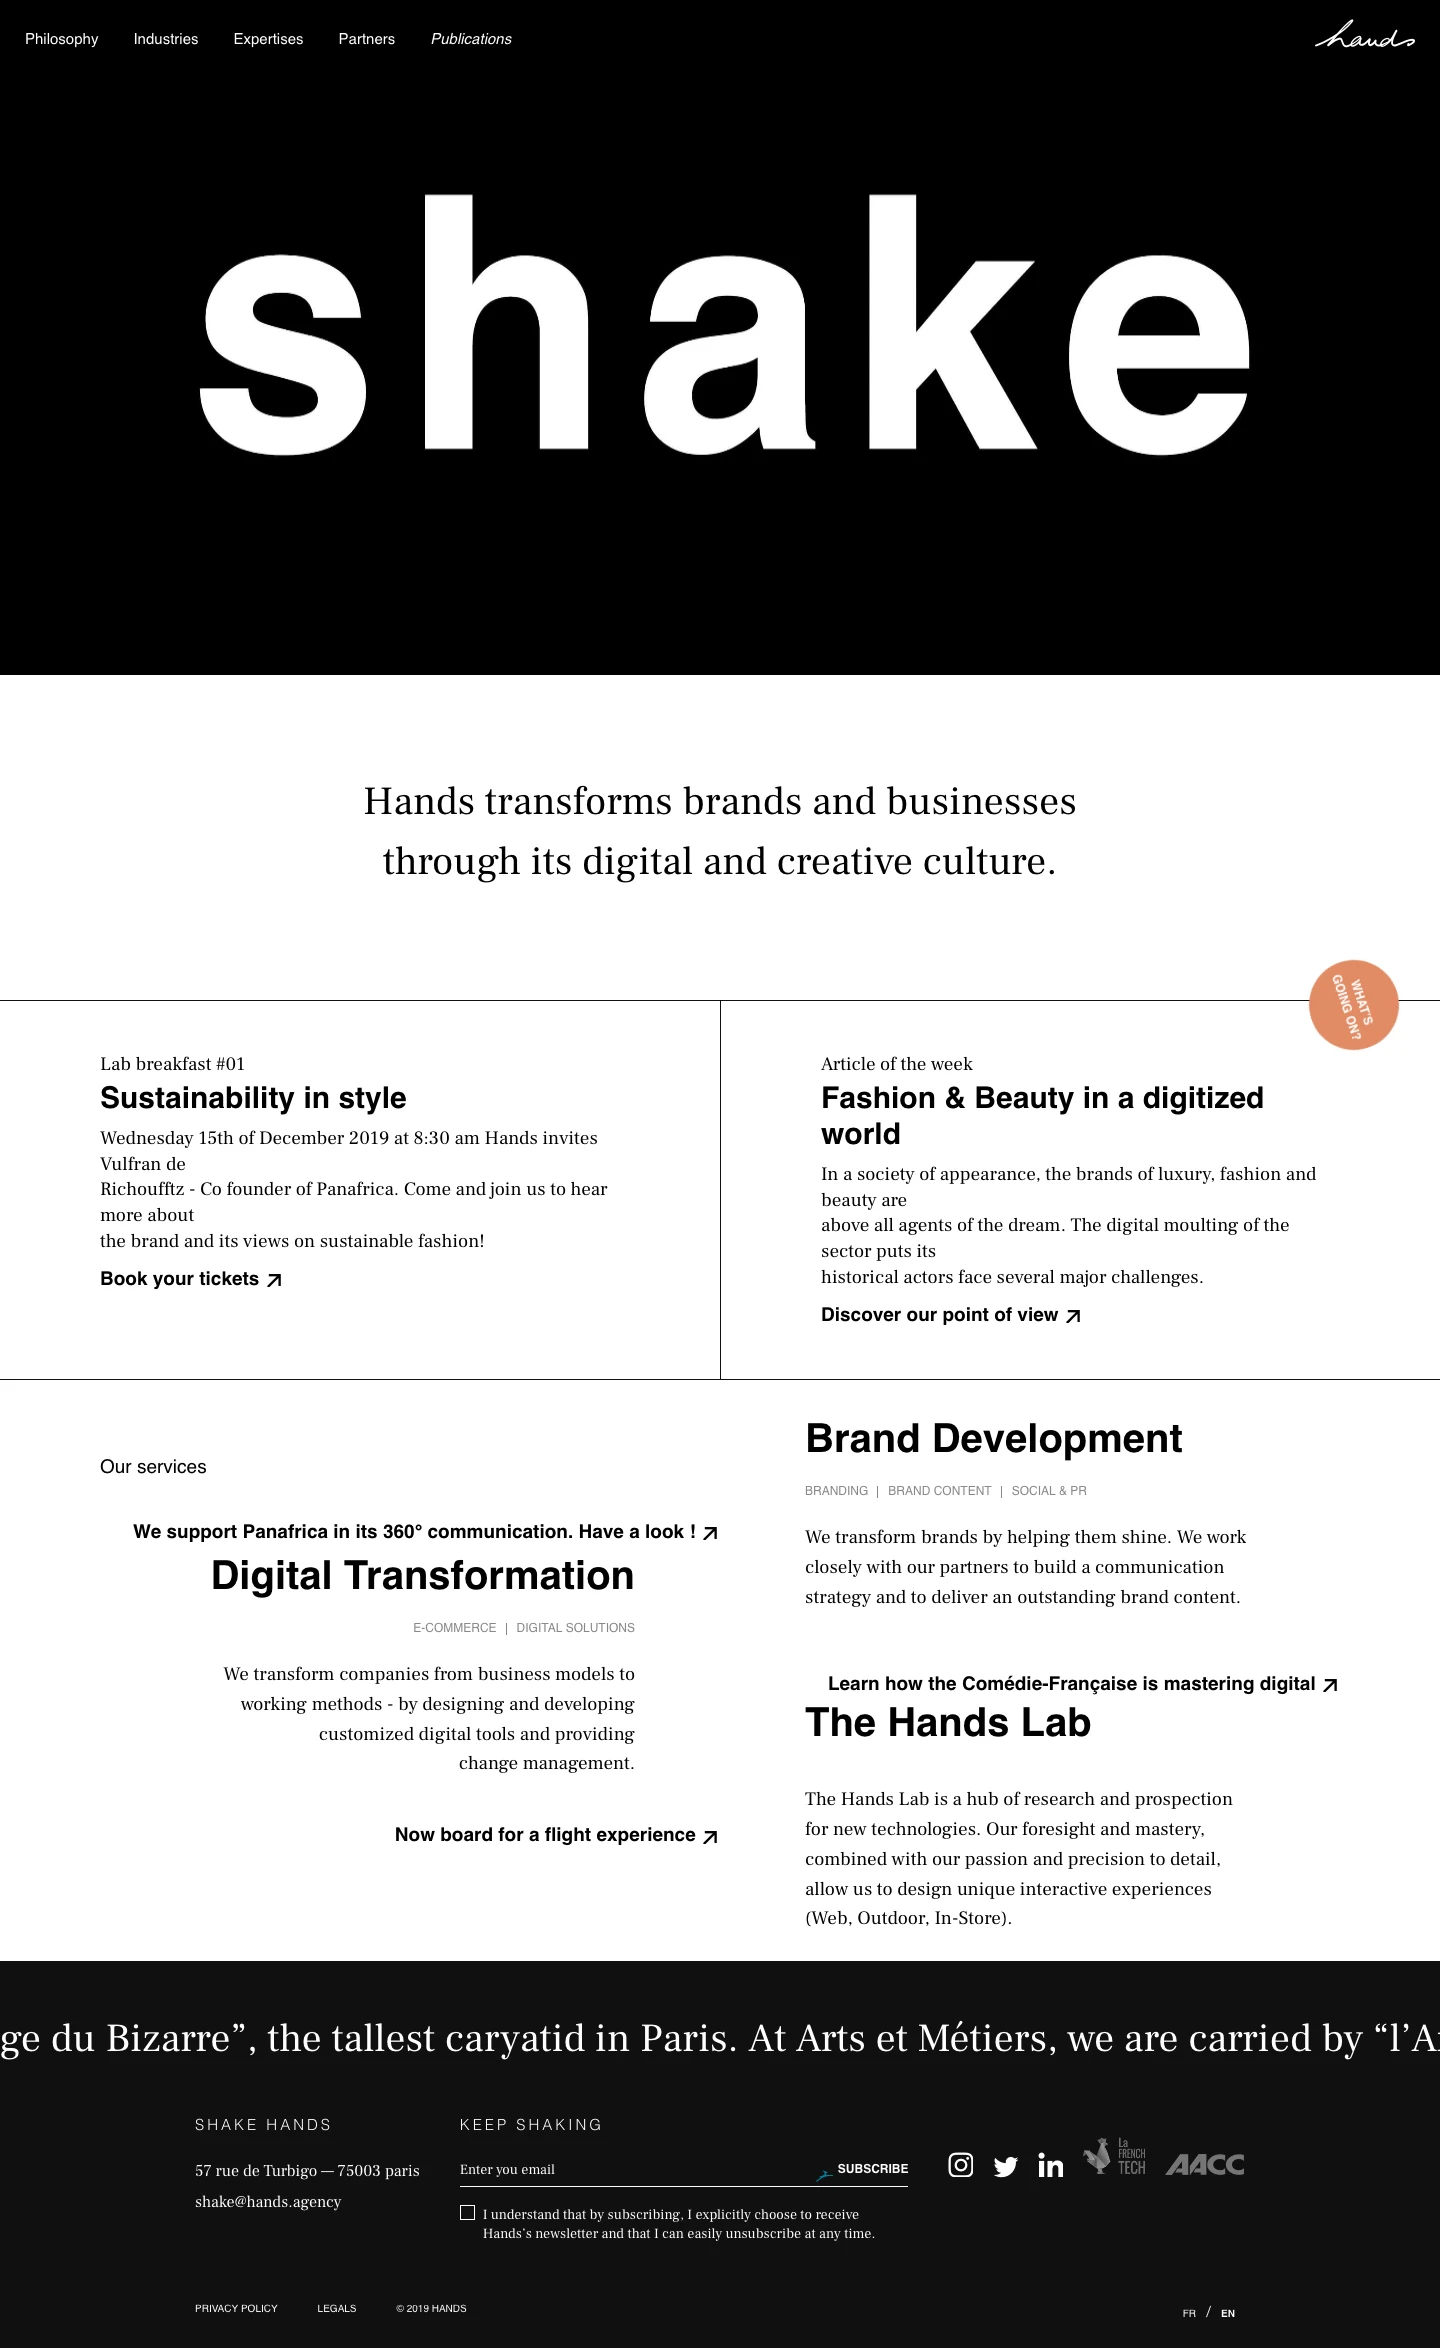 Hands Landing Page Example: Hands transforms brands and businesses through its digital culture of creativity, promoting a sustainable competitive advantage.